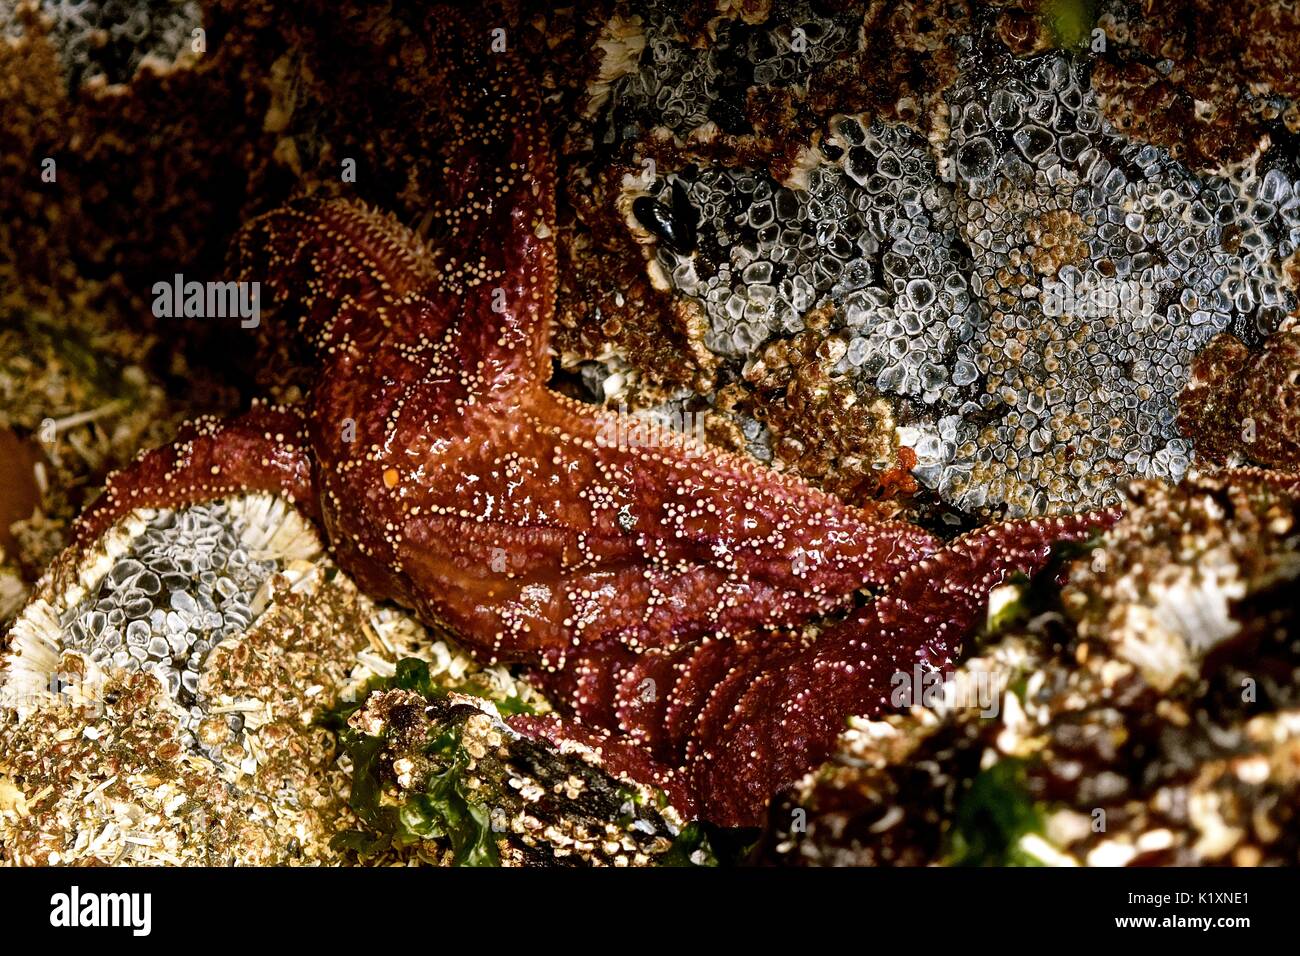 Low tide on Puget Sound reveals seabed dwellers like this starfish. Stock Photo